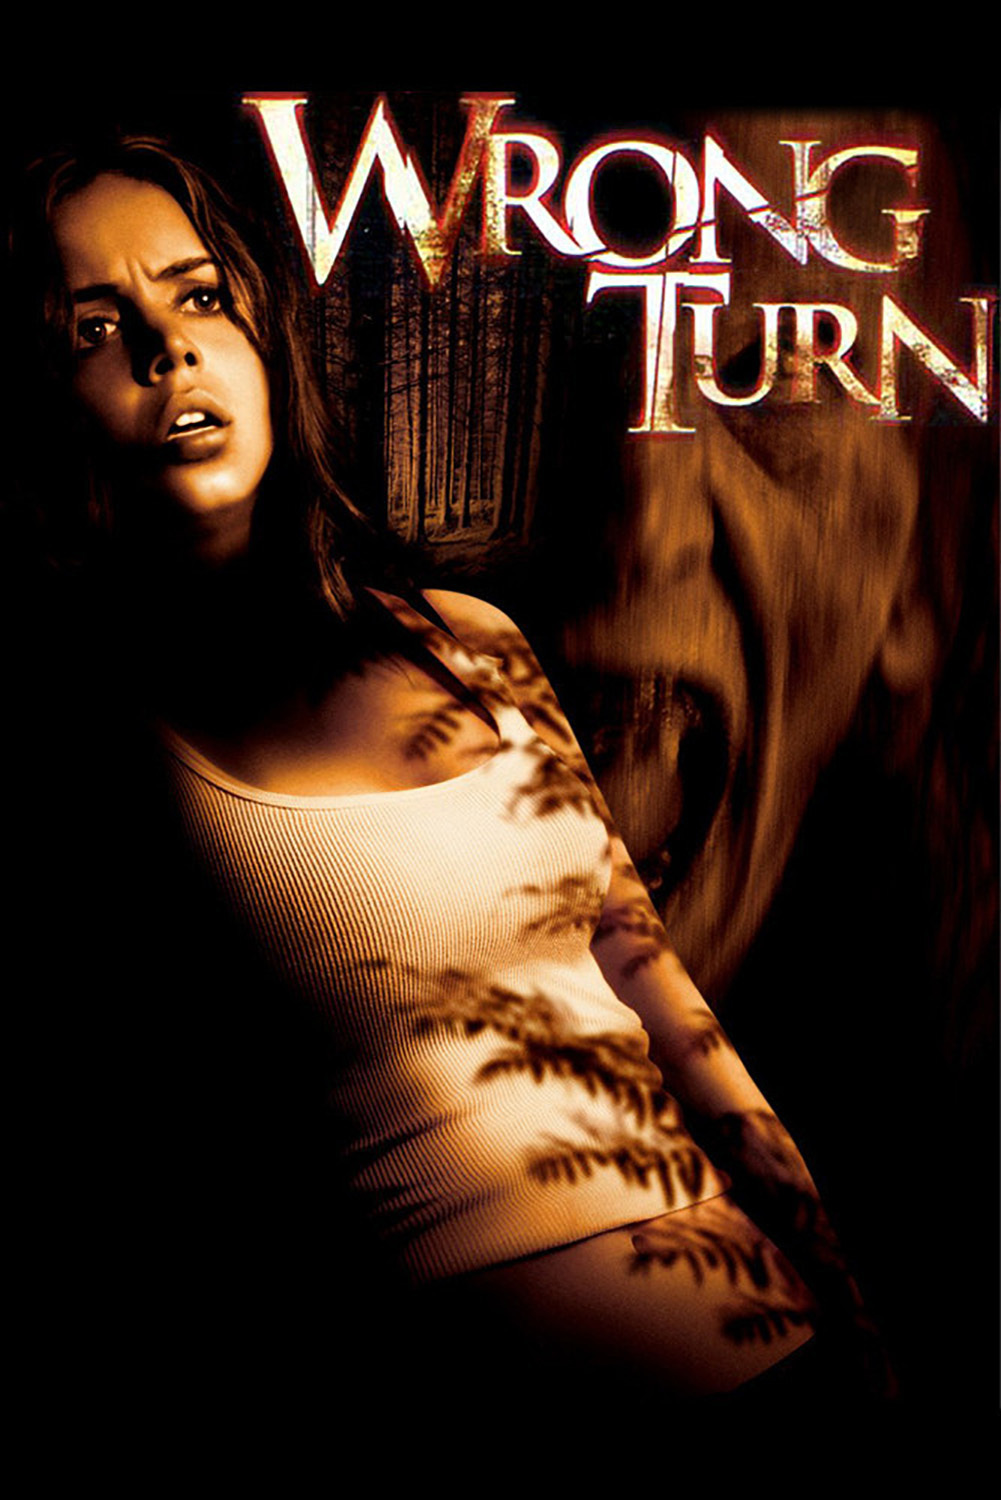 Poster for the movie "Wrong Turn"